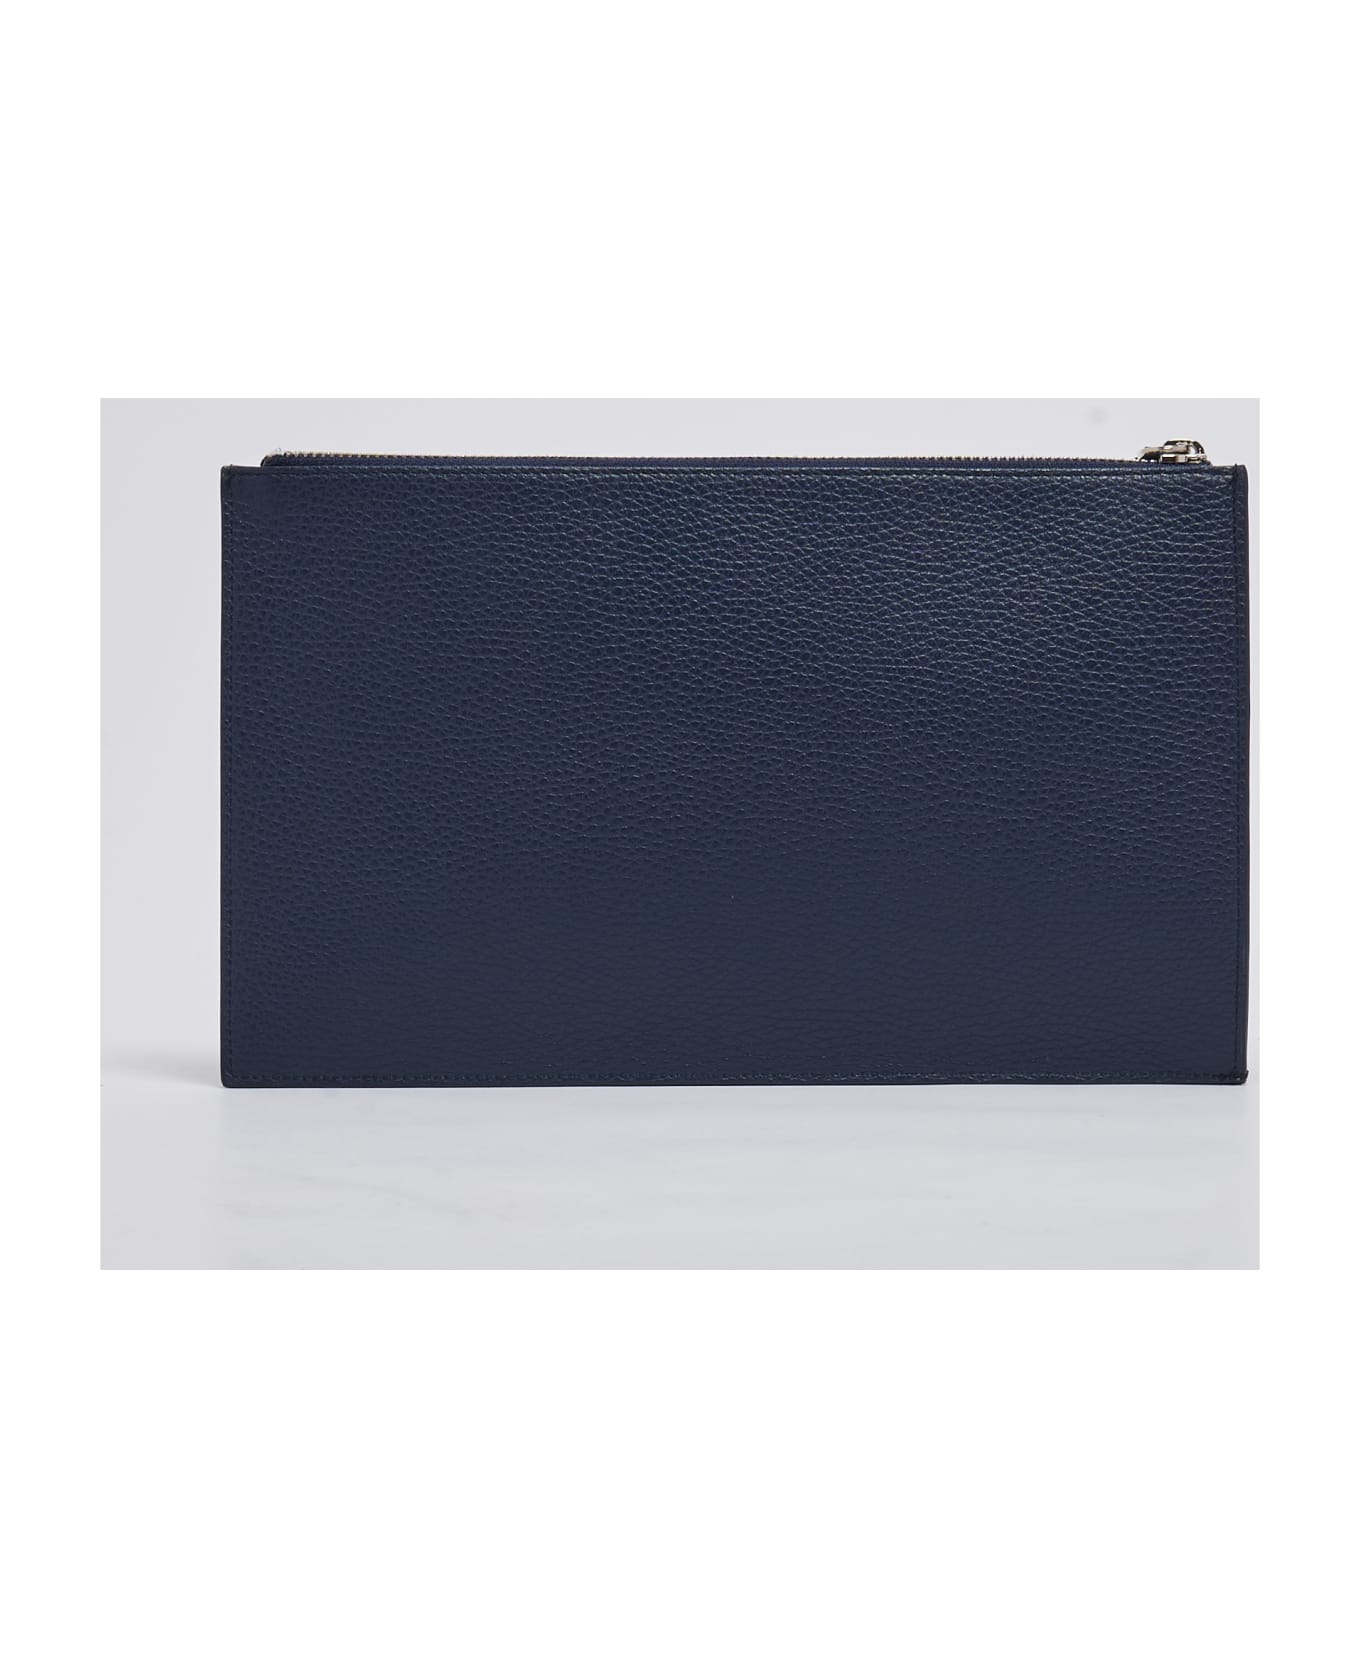 Orciani Pocket Grande Micron Clutch - NAVY バッグ